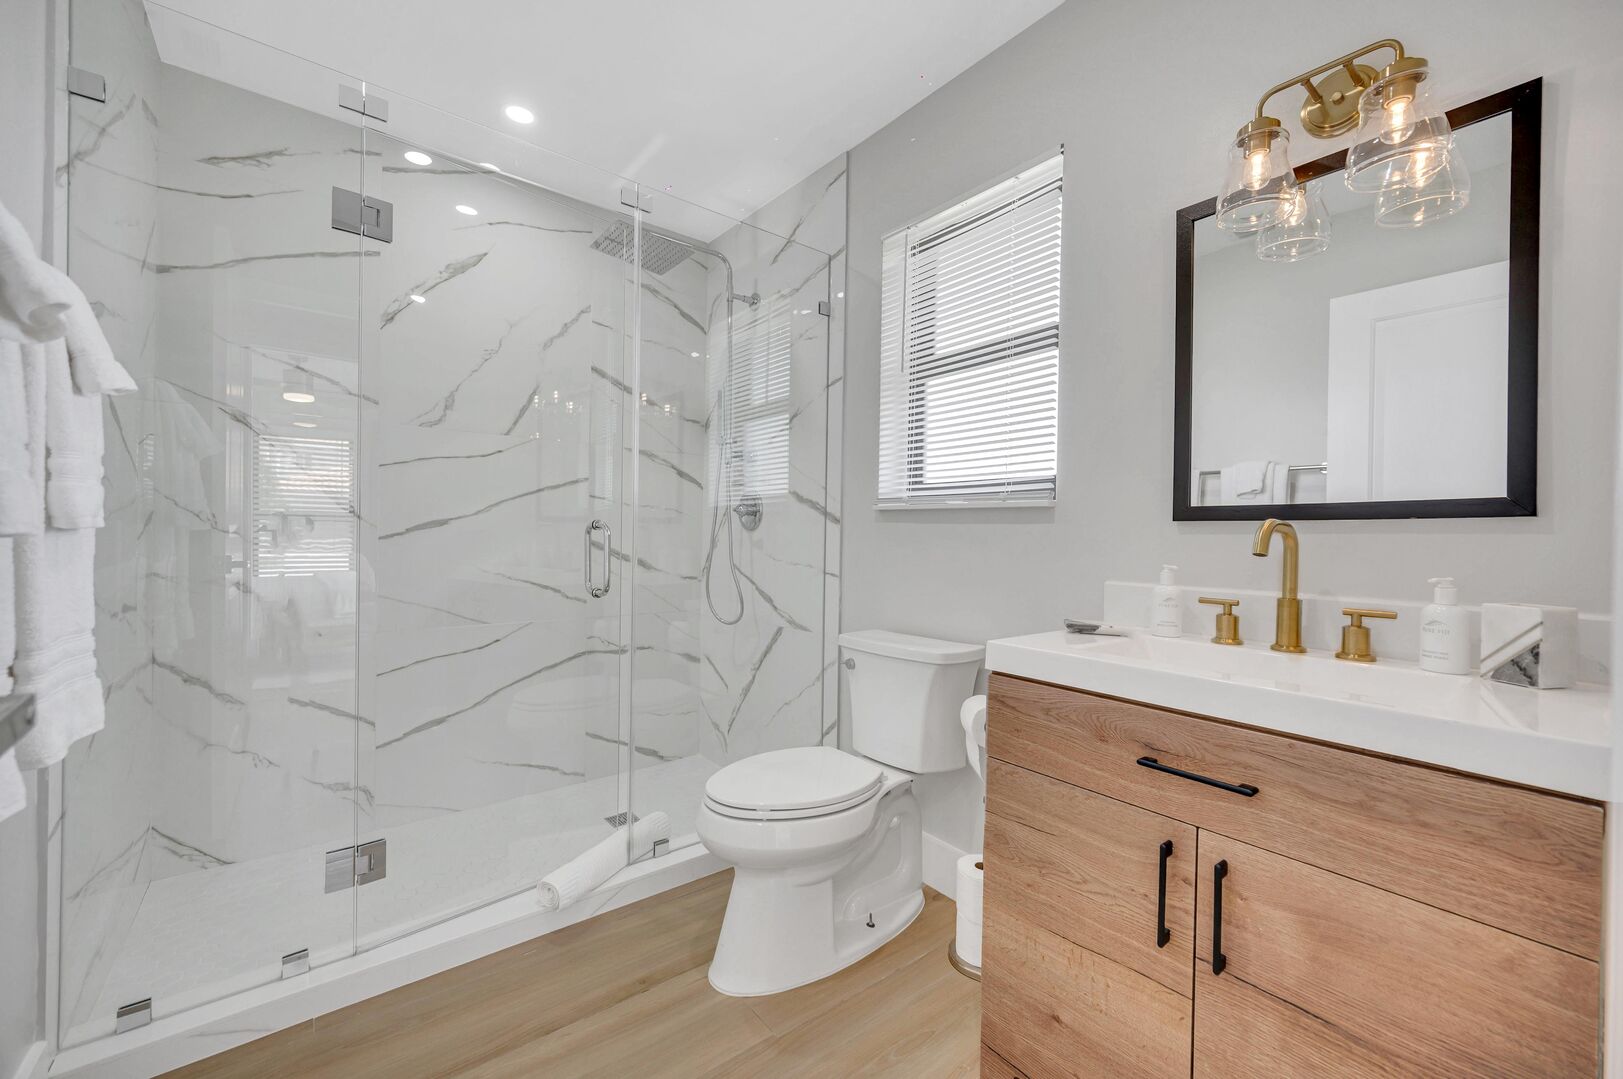 The guest bathroom features a walk-in shower across from bedroom 3 & 4.